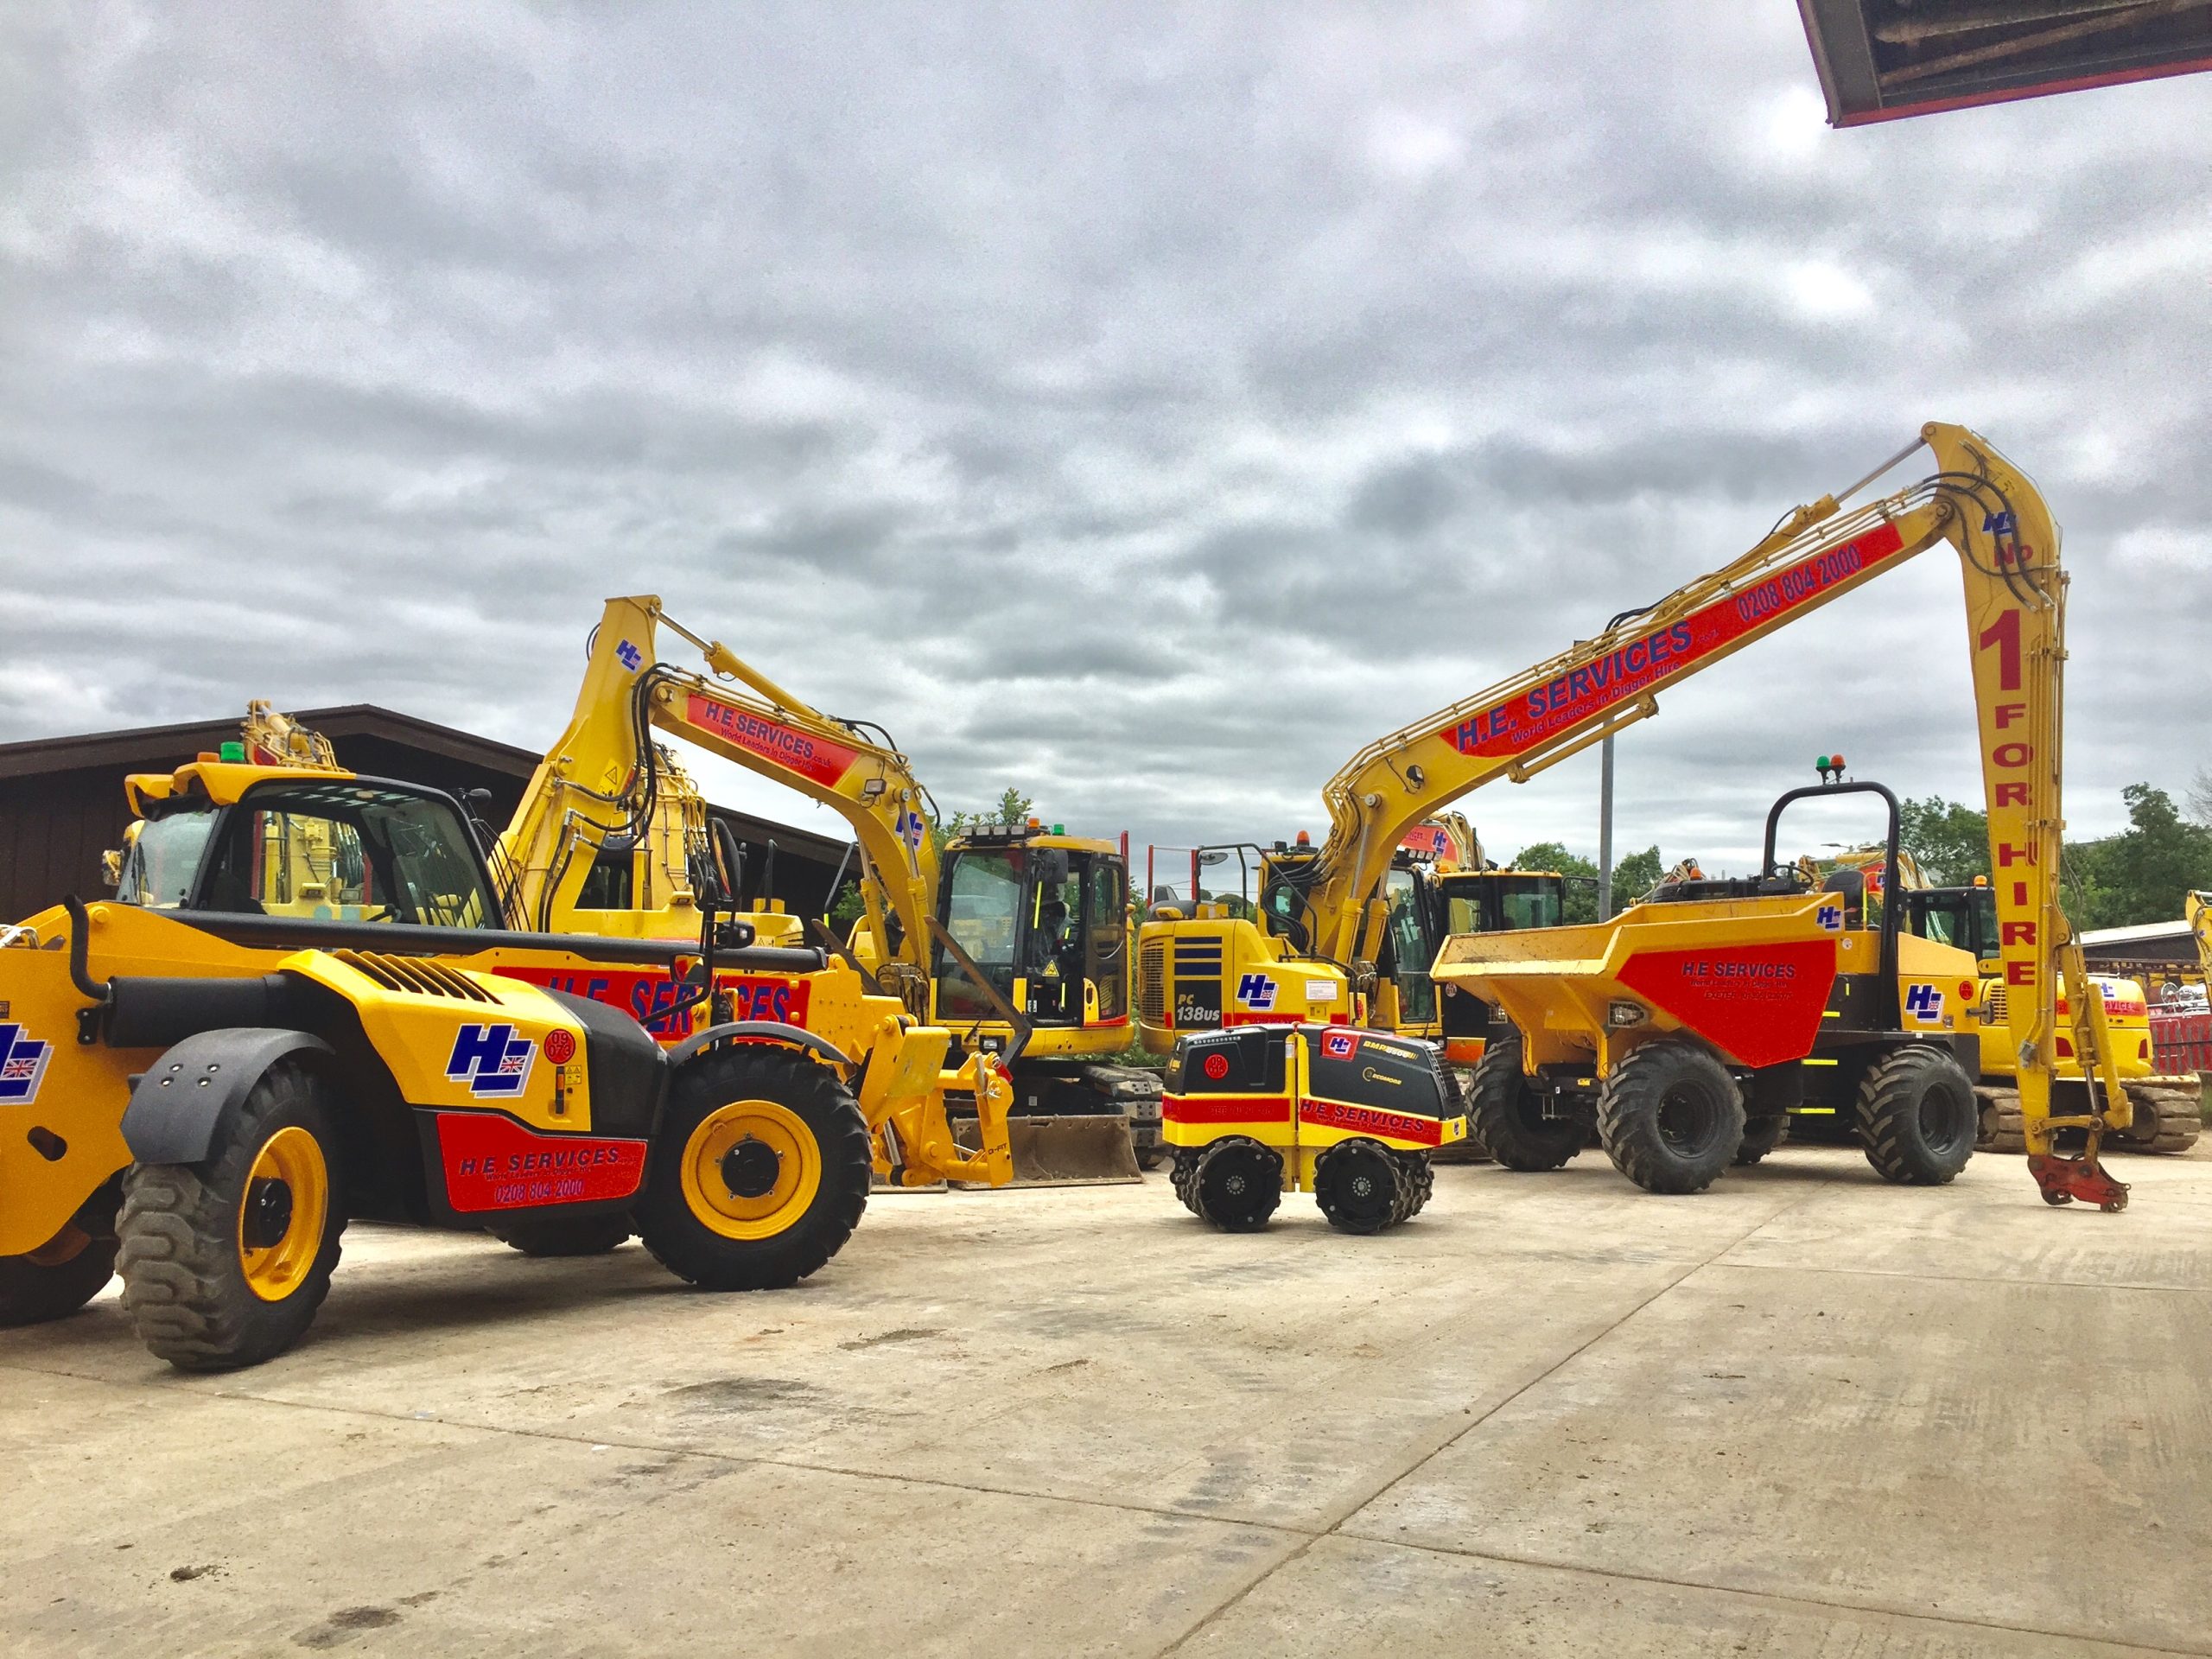 H. E. Services machines for hire - Exeter Depot